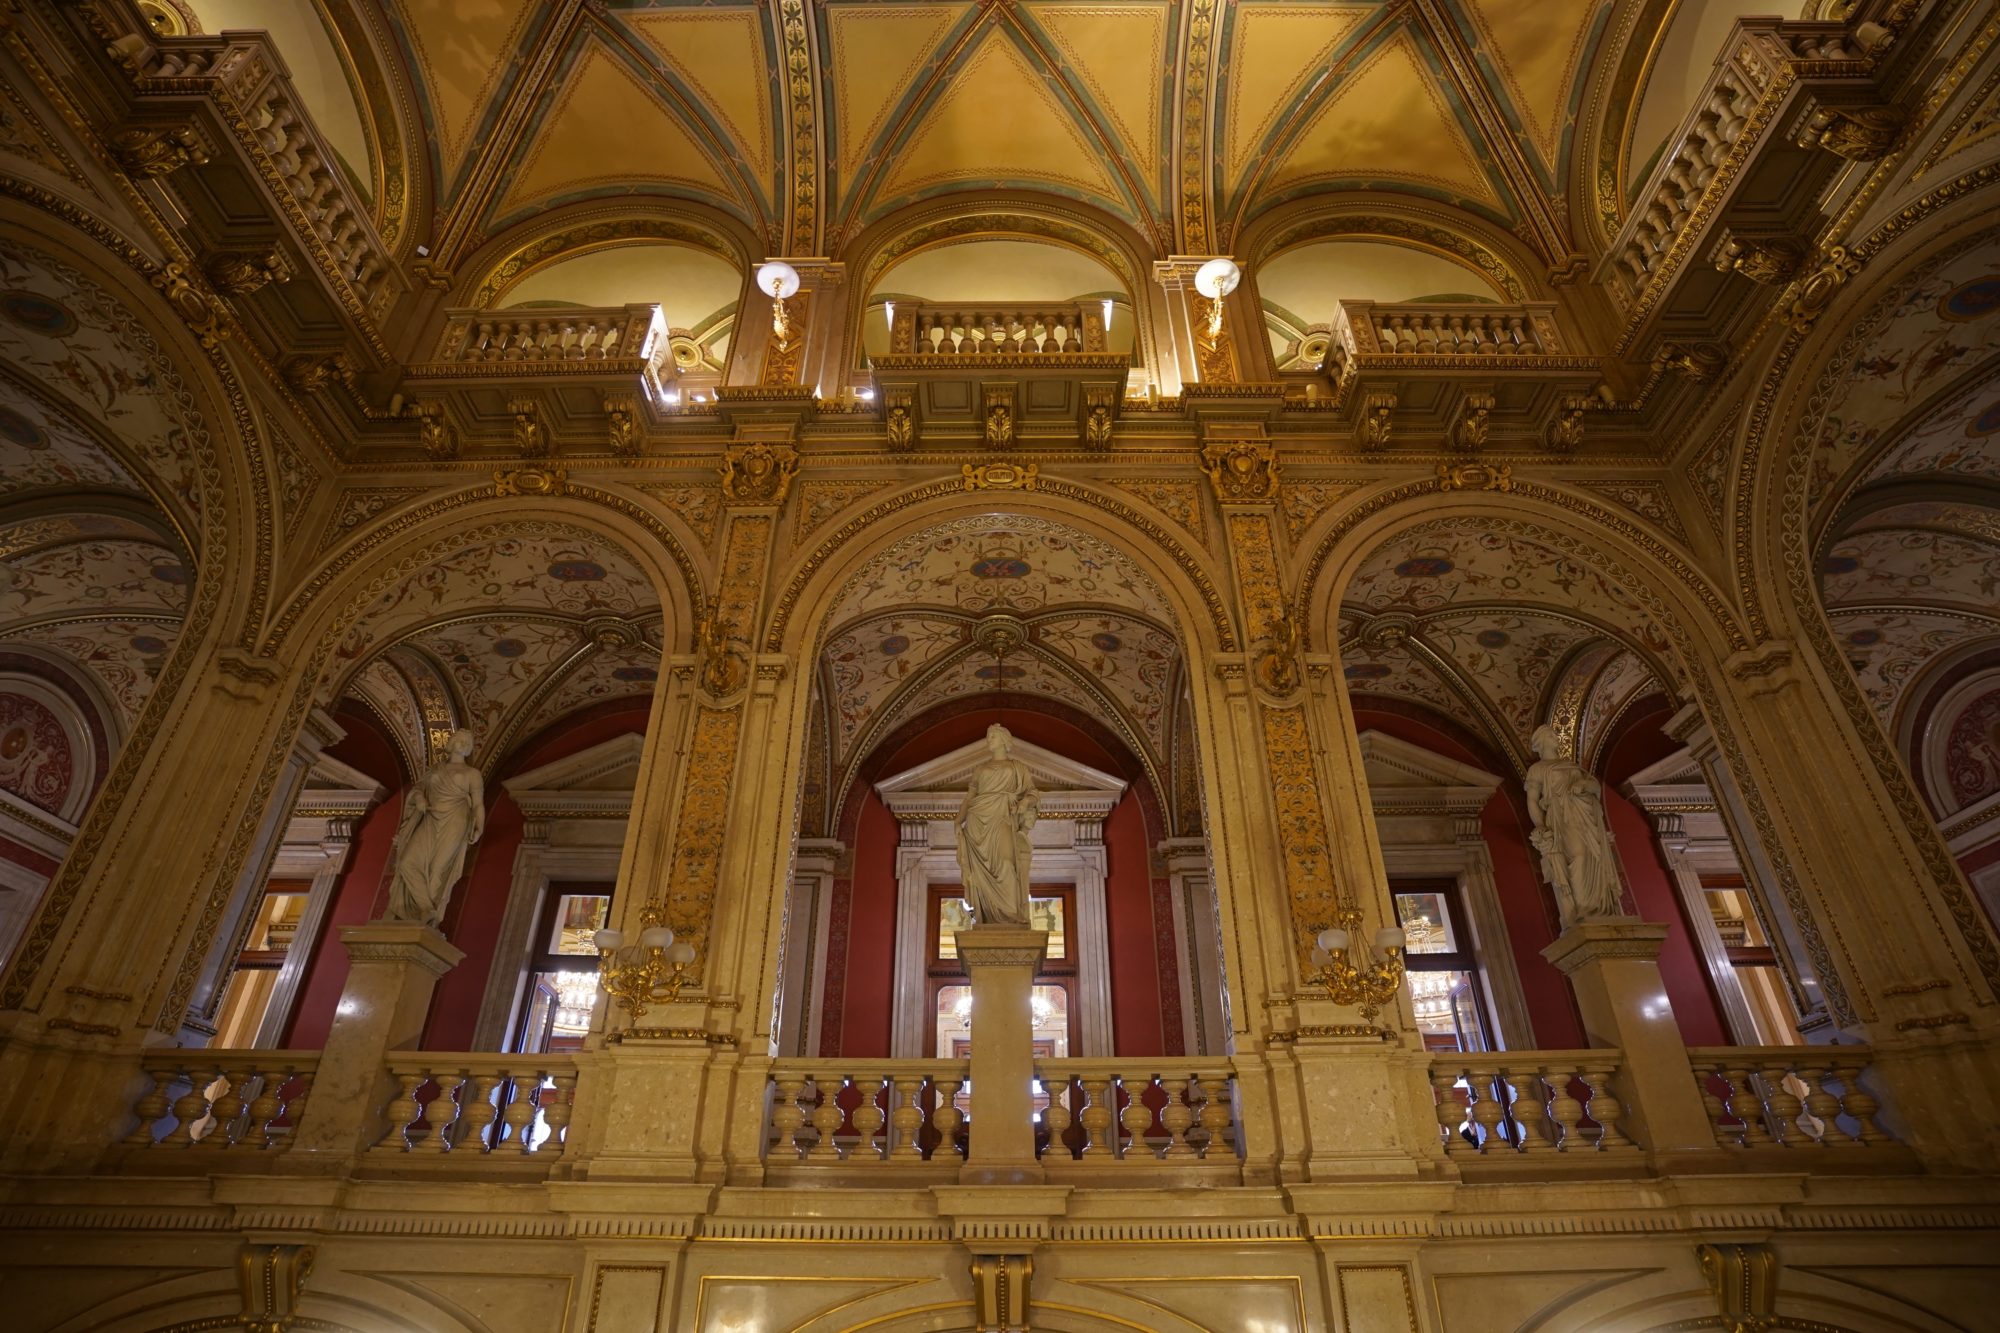 Inside the Vienna State Opera House: beautifully decorated in gold